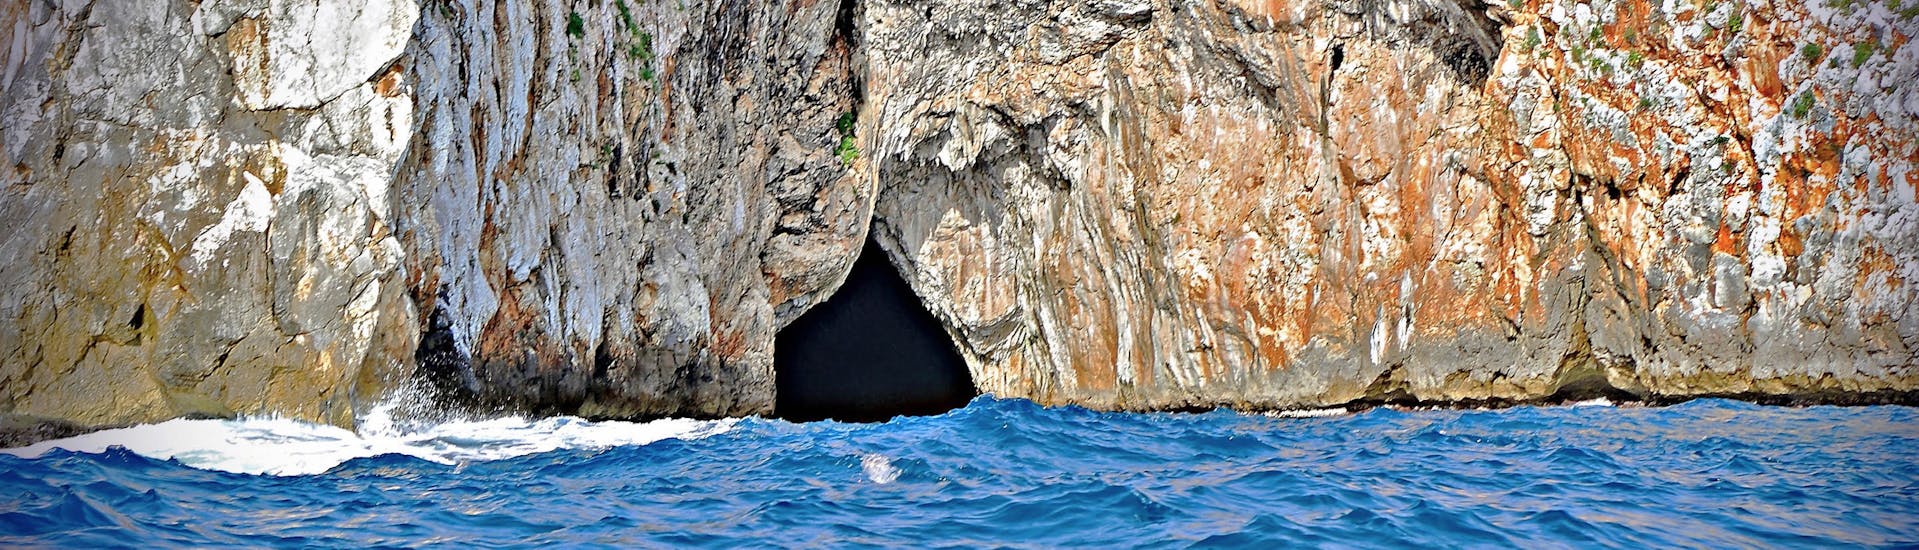 Private Boat Trip to Salento Caves from Andrano Marina